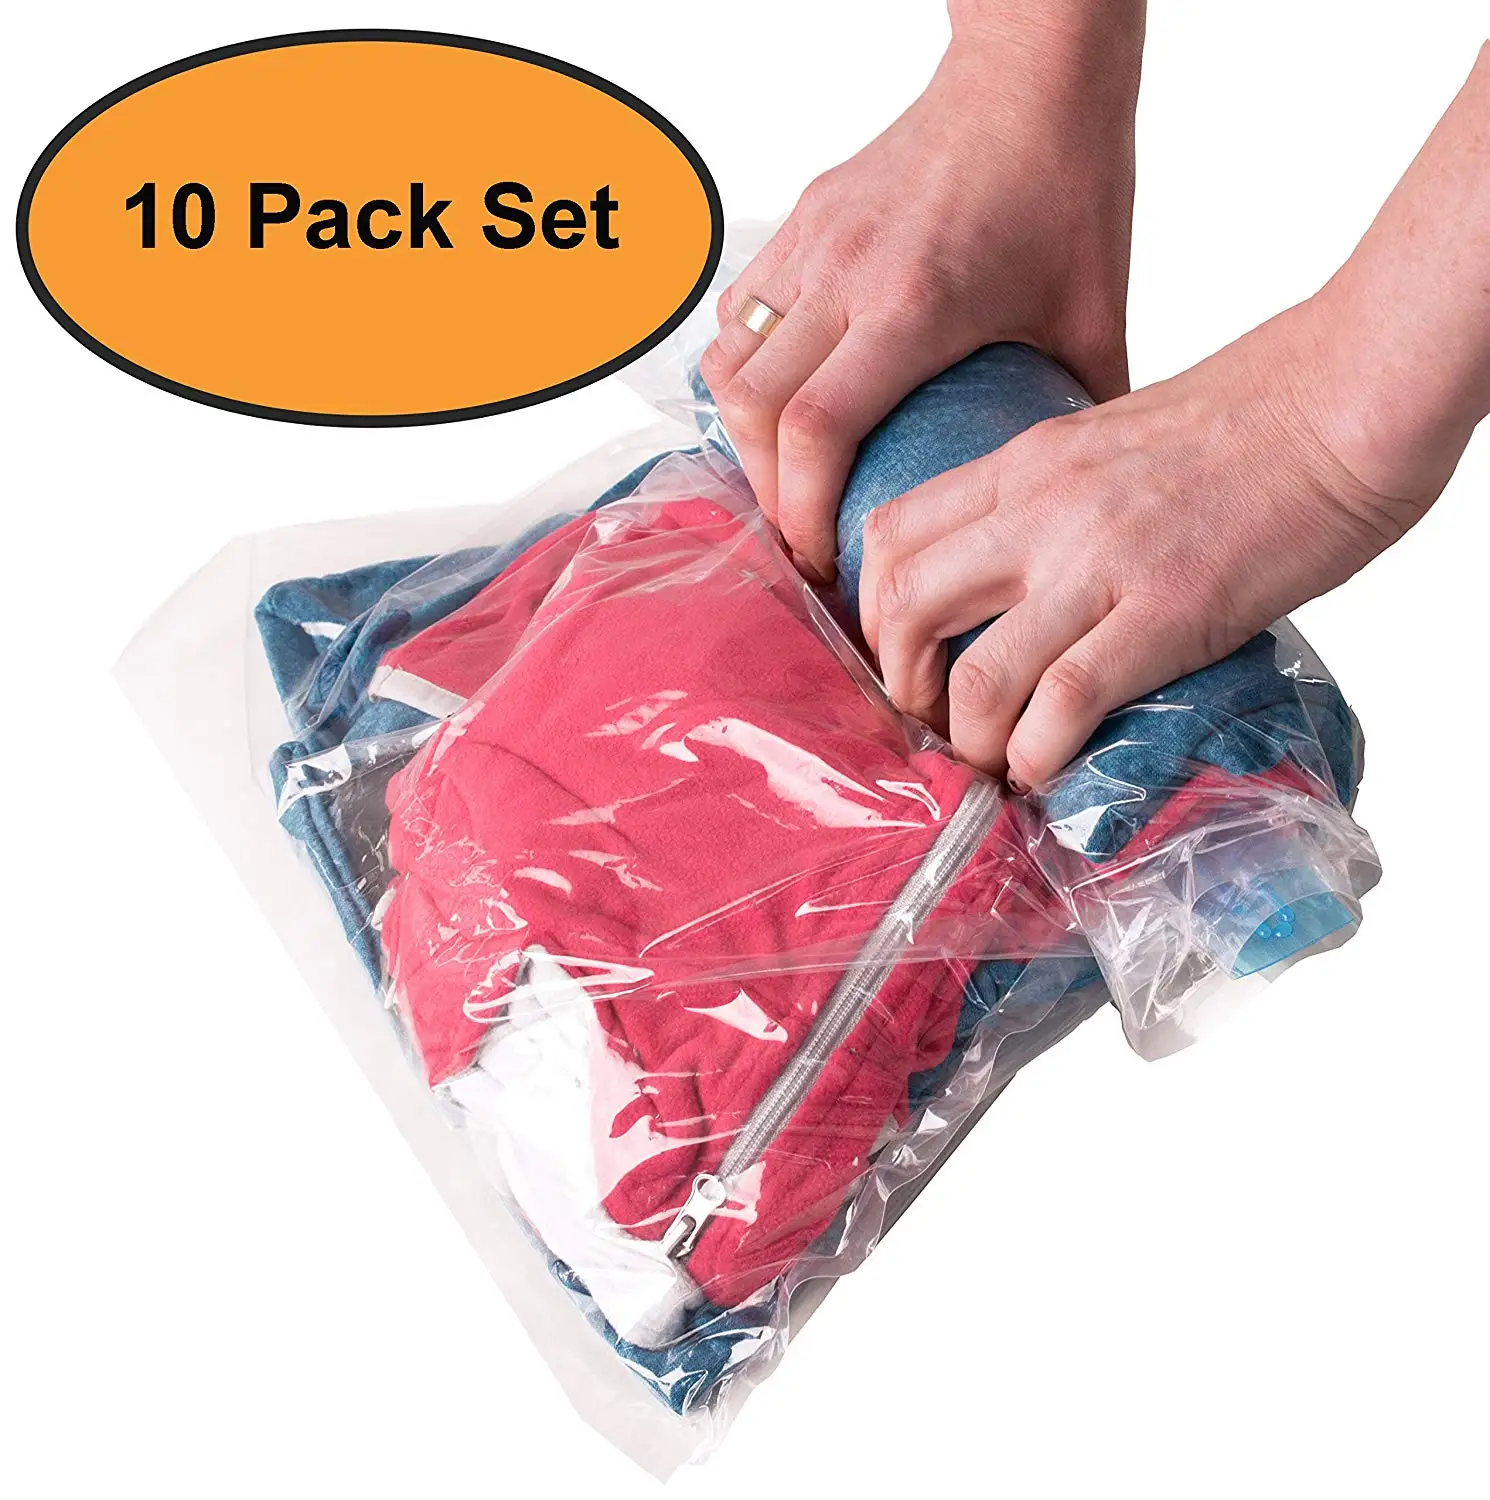 vacuum storage bags for clothes